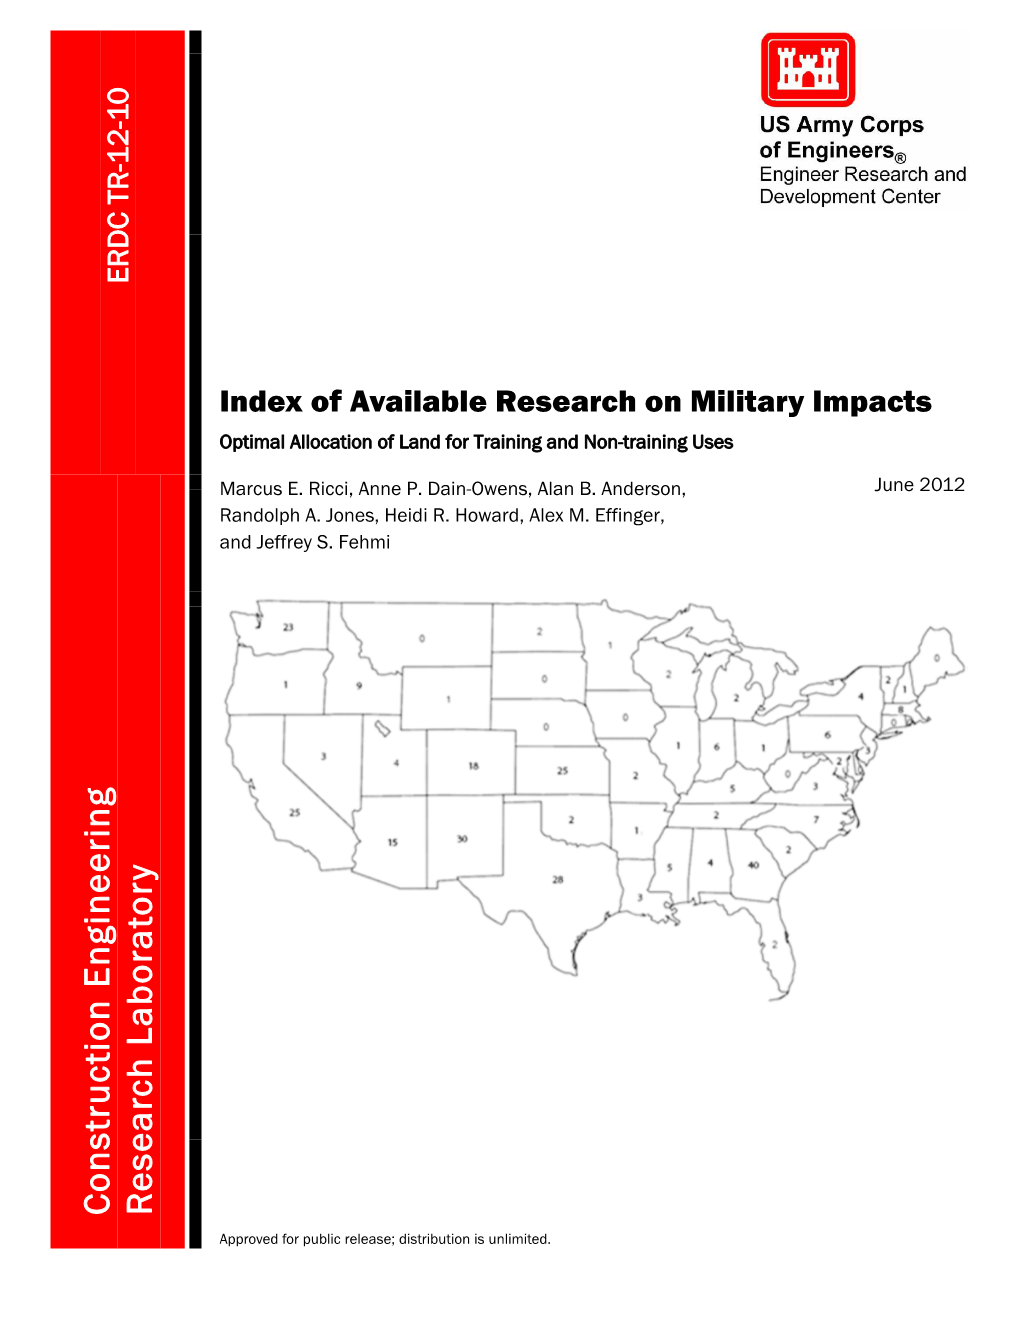 Of Available Research on Military Impacts Optimal Allocation of Land for Training and Non-Training Uses